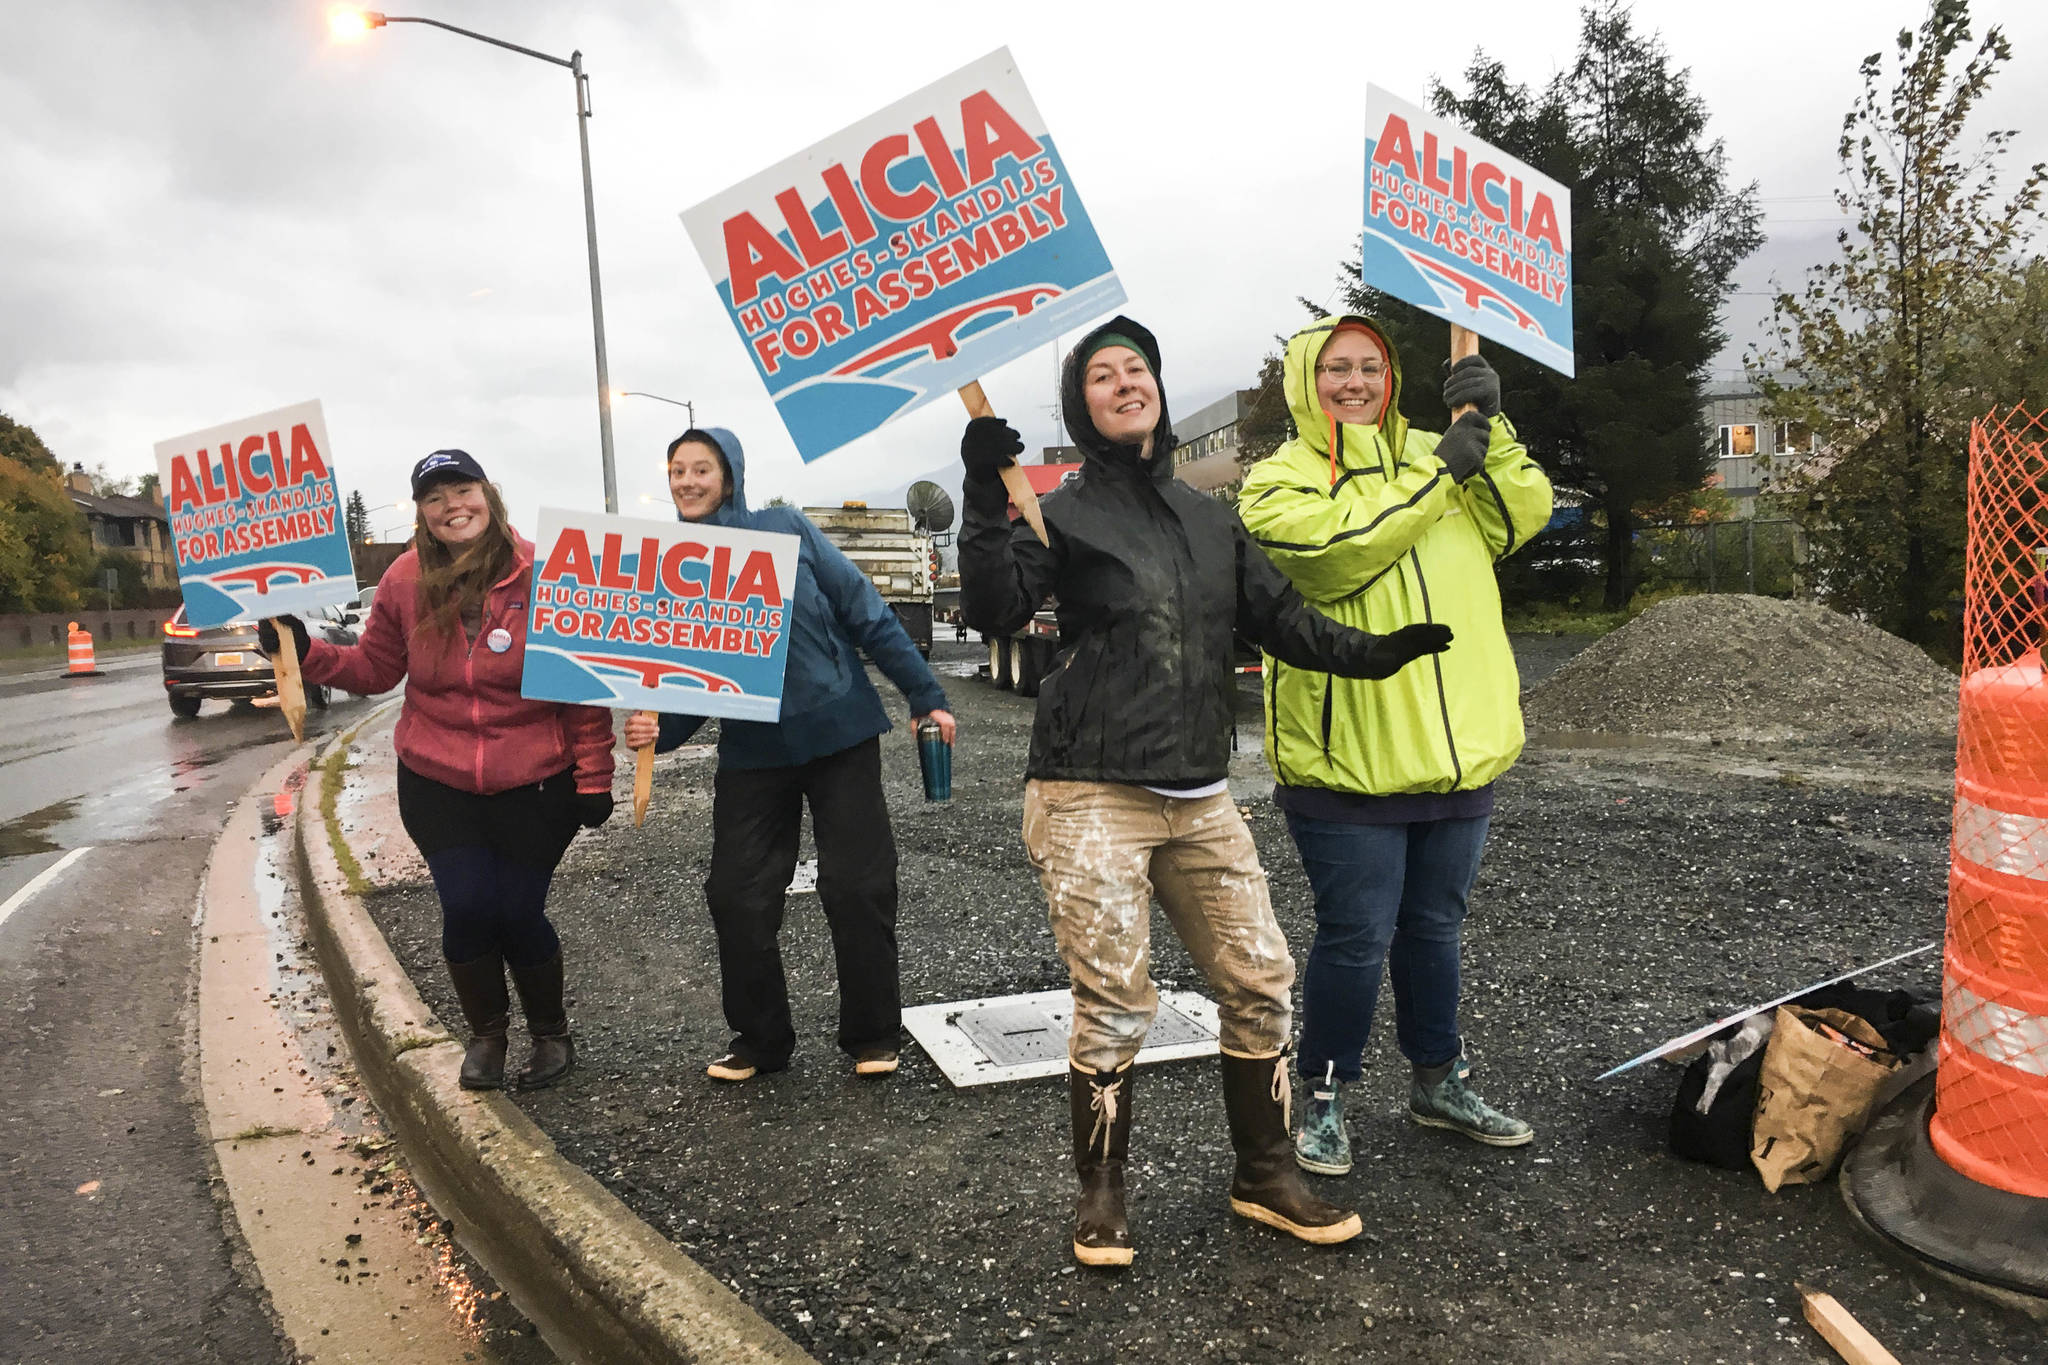 Alicia Hughes-Skandijs and some of her supporters wave signs in the intersection of Egan Drive and the Juneau-Douglas Bridge. Voting is from 7 a.m. to 8 p.m. on Tuesday, Oct. 1, 2019. (Michael S. Lockett | Juneau Empire)